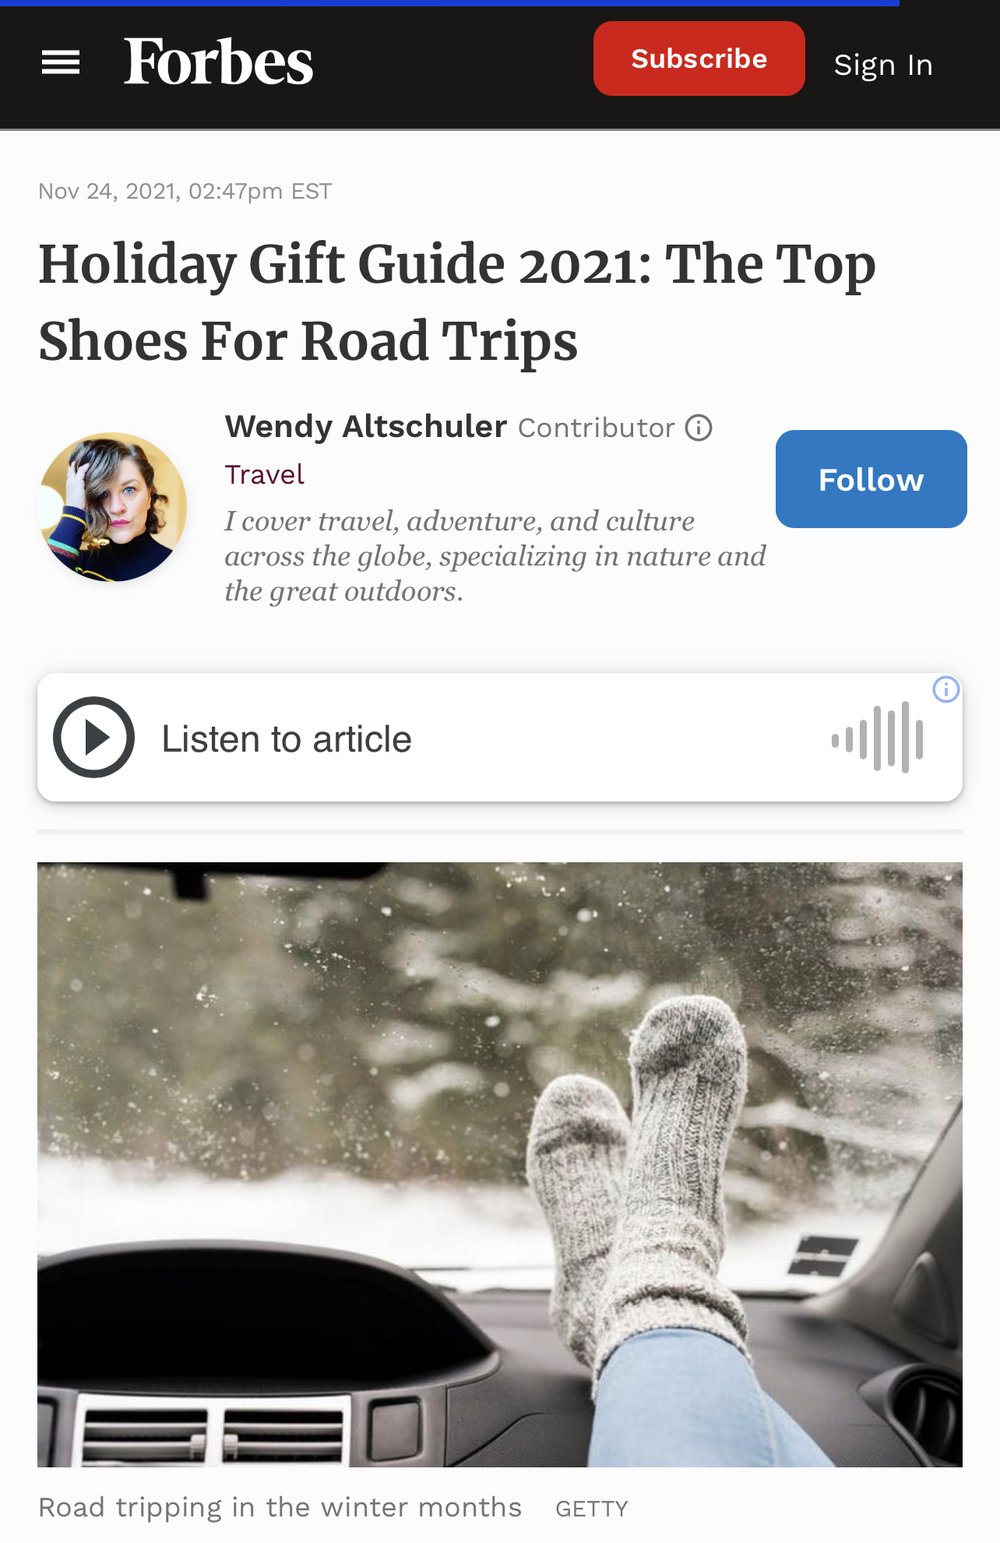 Holiday Gift Guide 2021: The Top Shoes For Road Trips